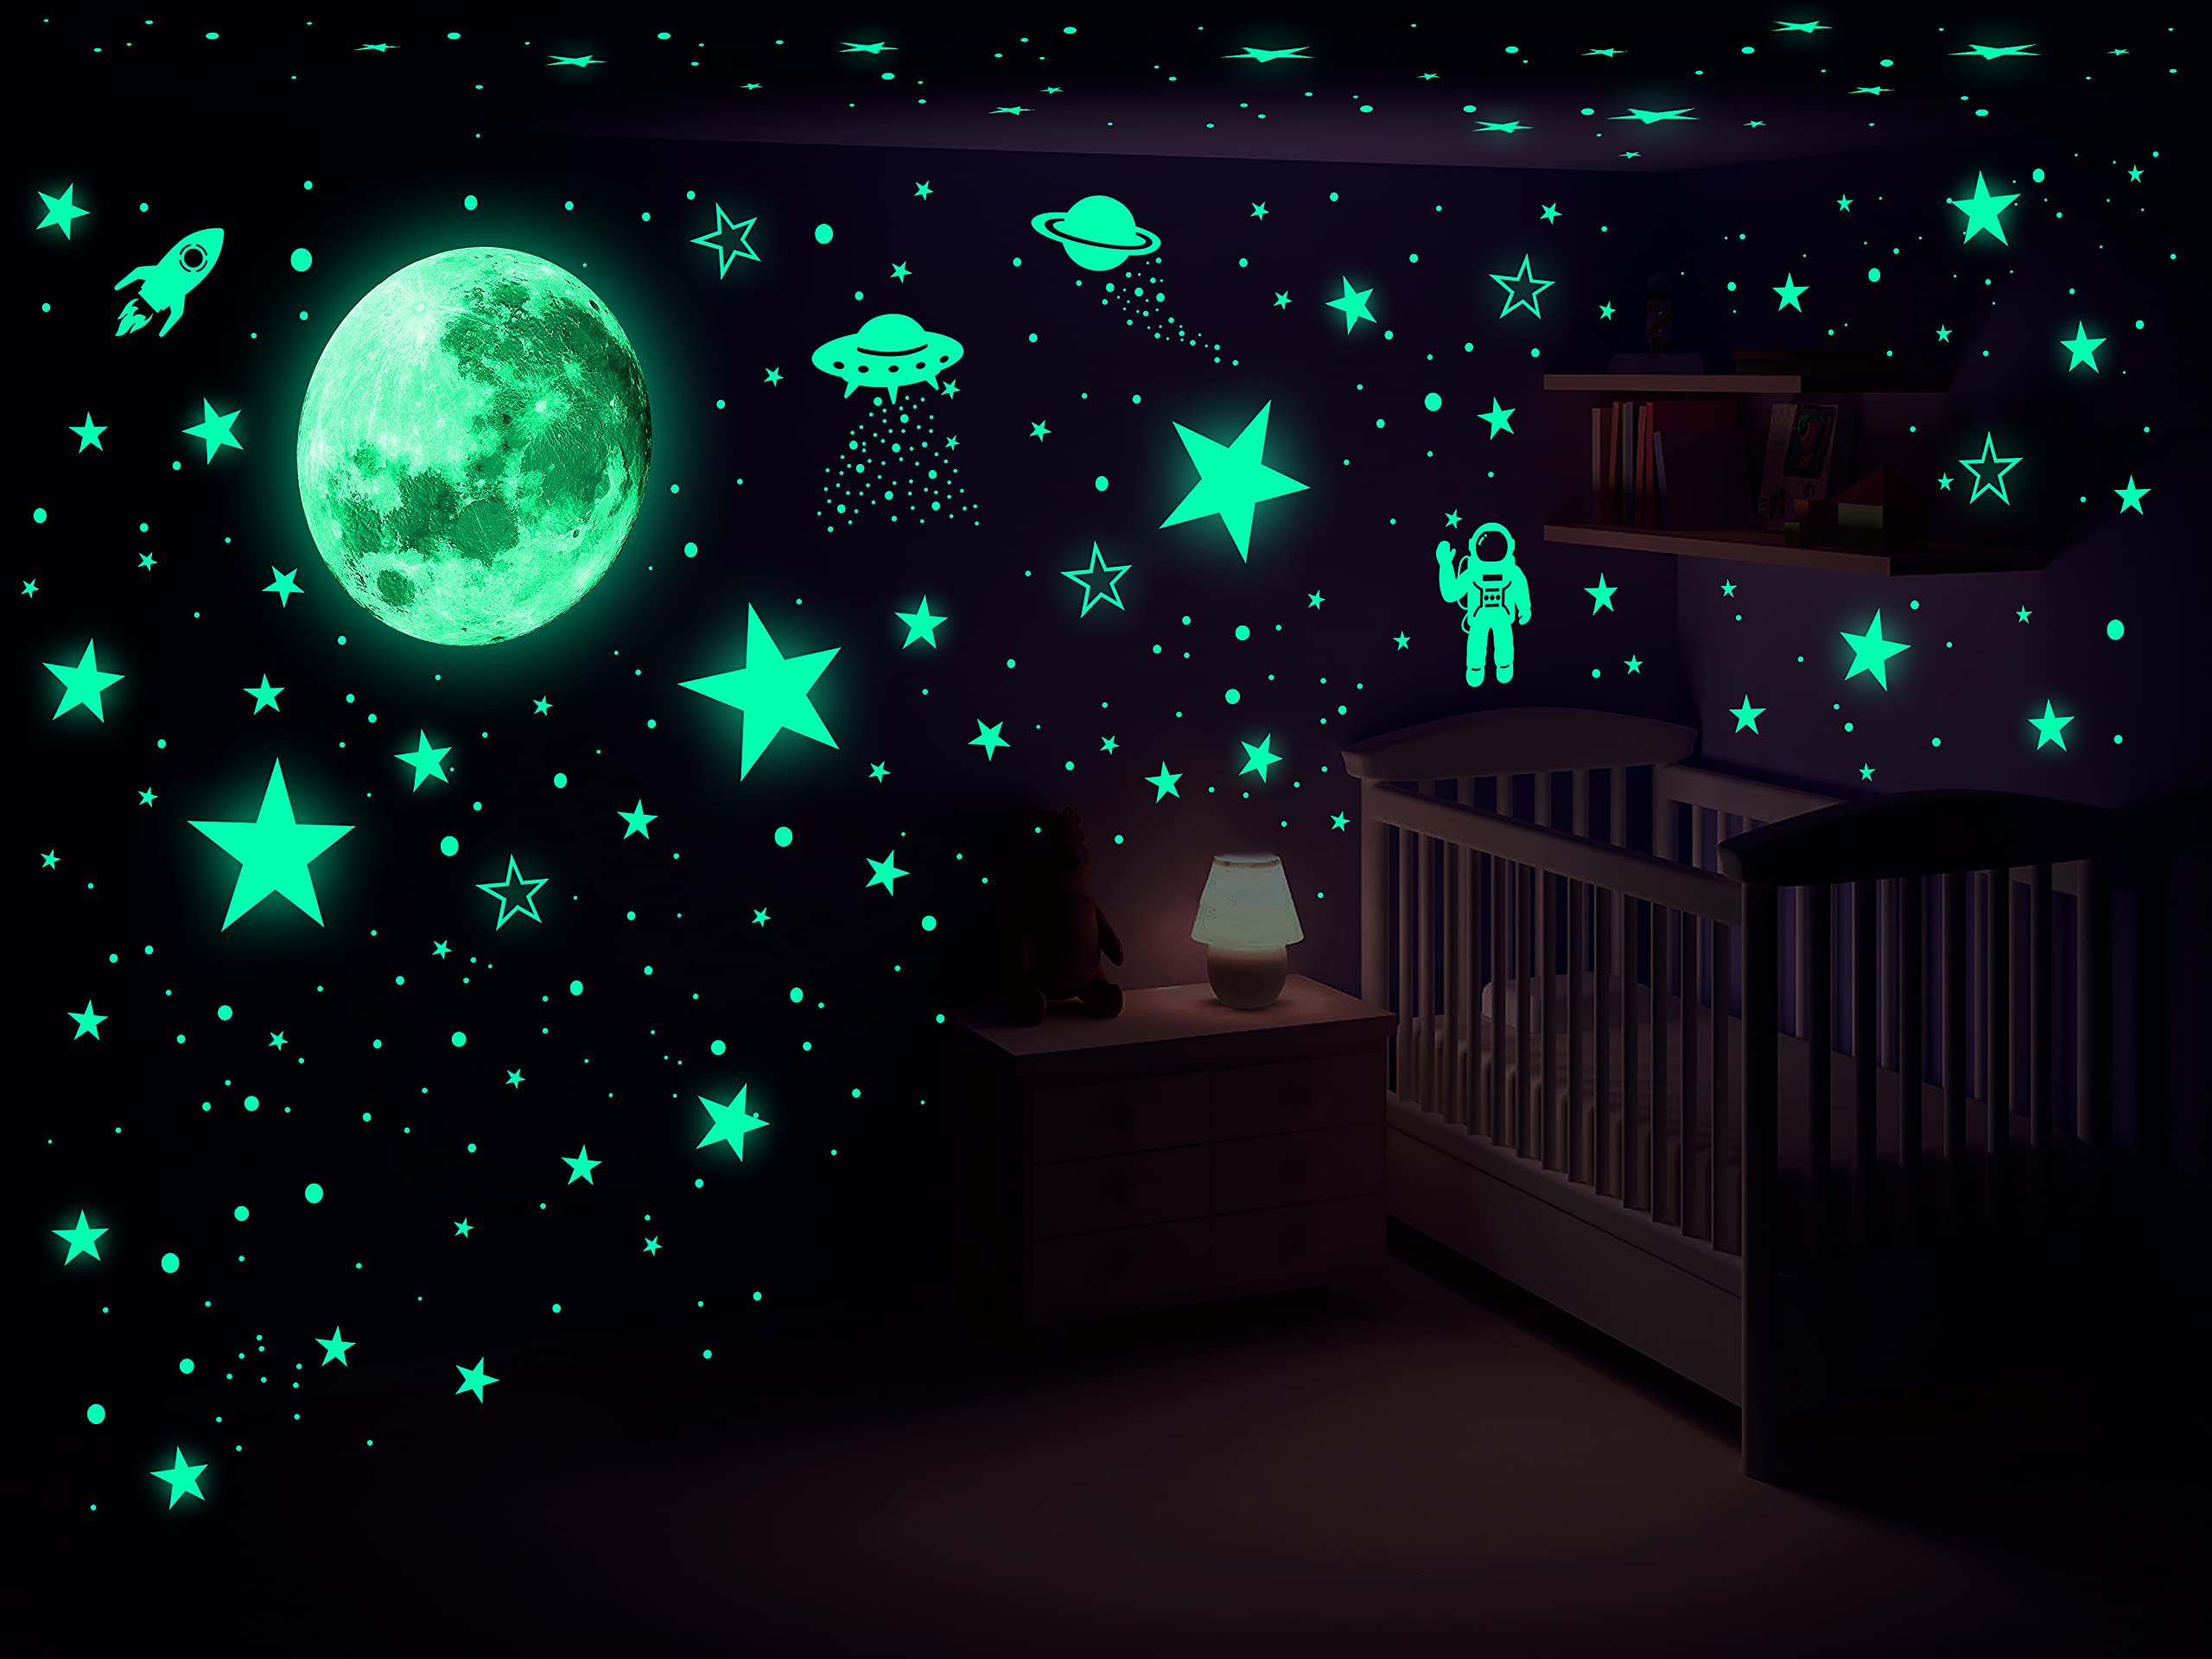 1078 PCS Glow in The Dark Stars for Ceiling, Glowing Stars for Ceiling Planets, Stars Wall Decals, Solar System Galaxy Space Nursery Wall Stickers Rocket Astronaut Kids Boys Room Decorations Bedroom